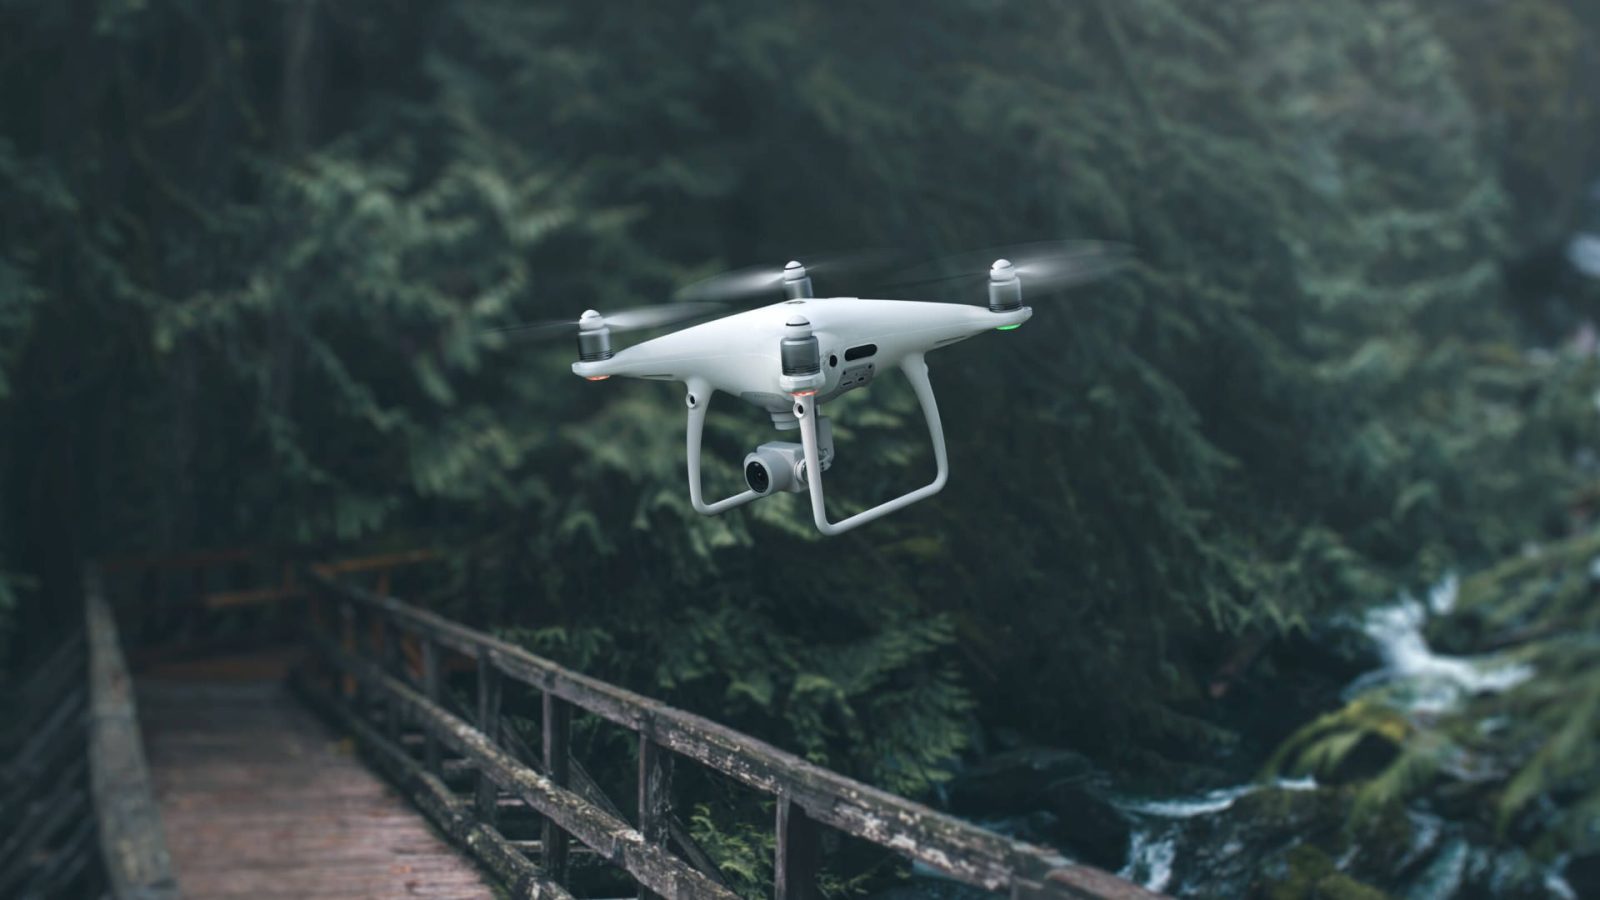 Nine DJI drones comply with new Transport Canada requirements